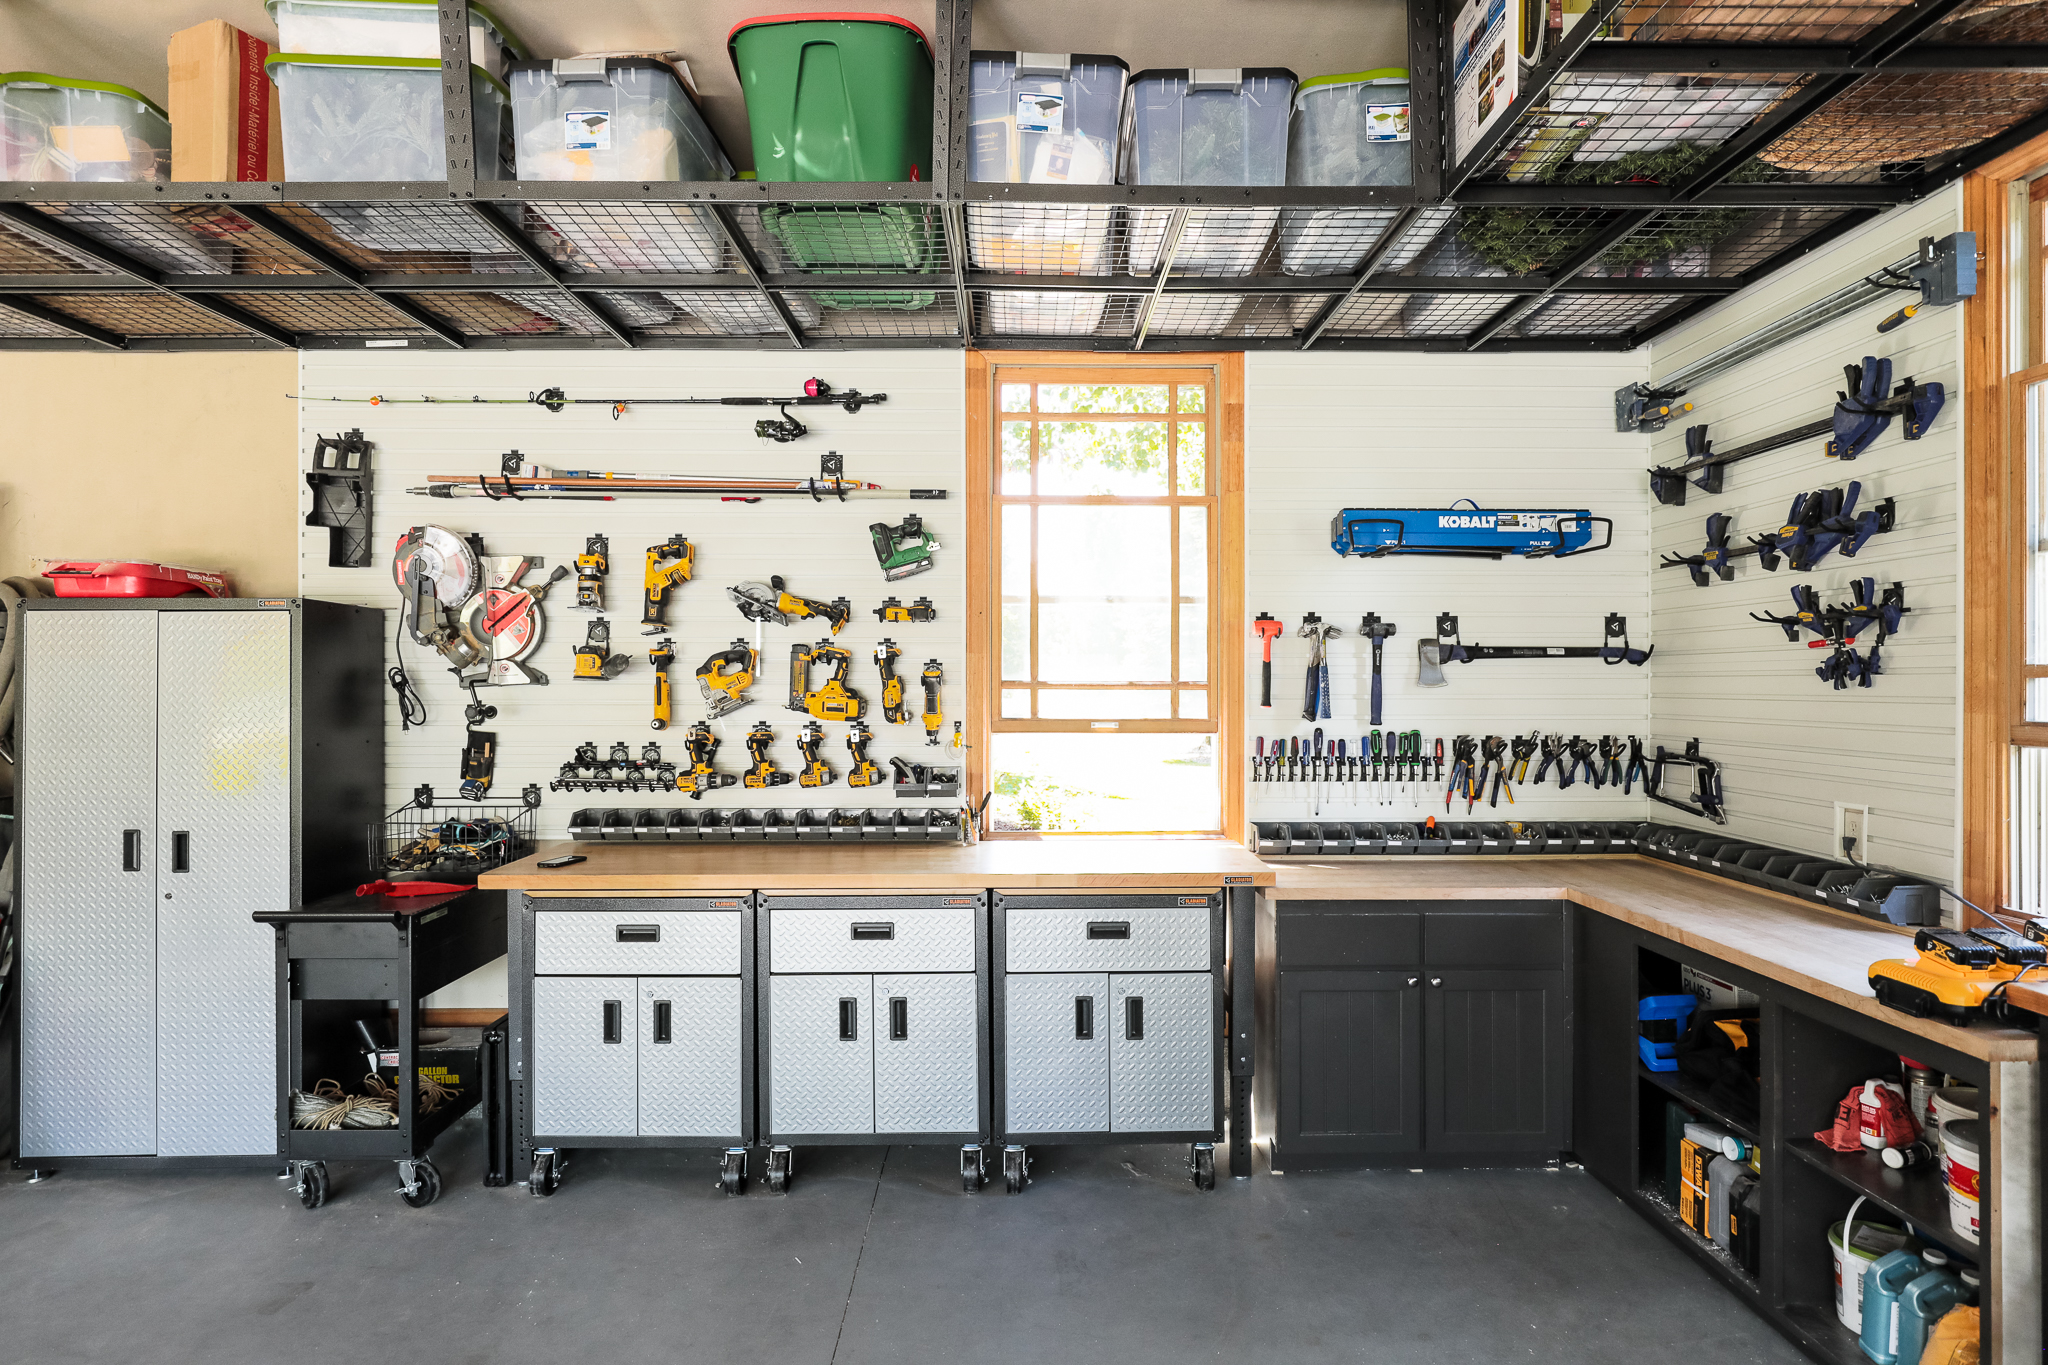 Affordable & Easy to Install Garage Organization Options - Chris Loves Julia